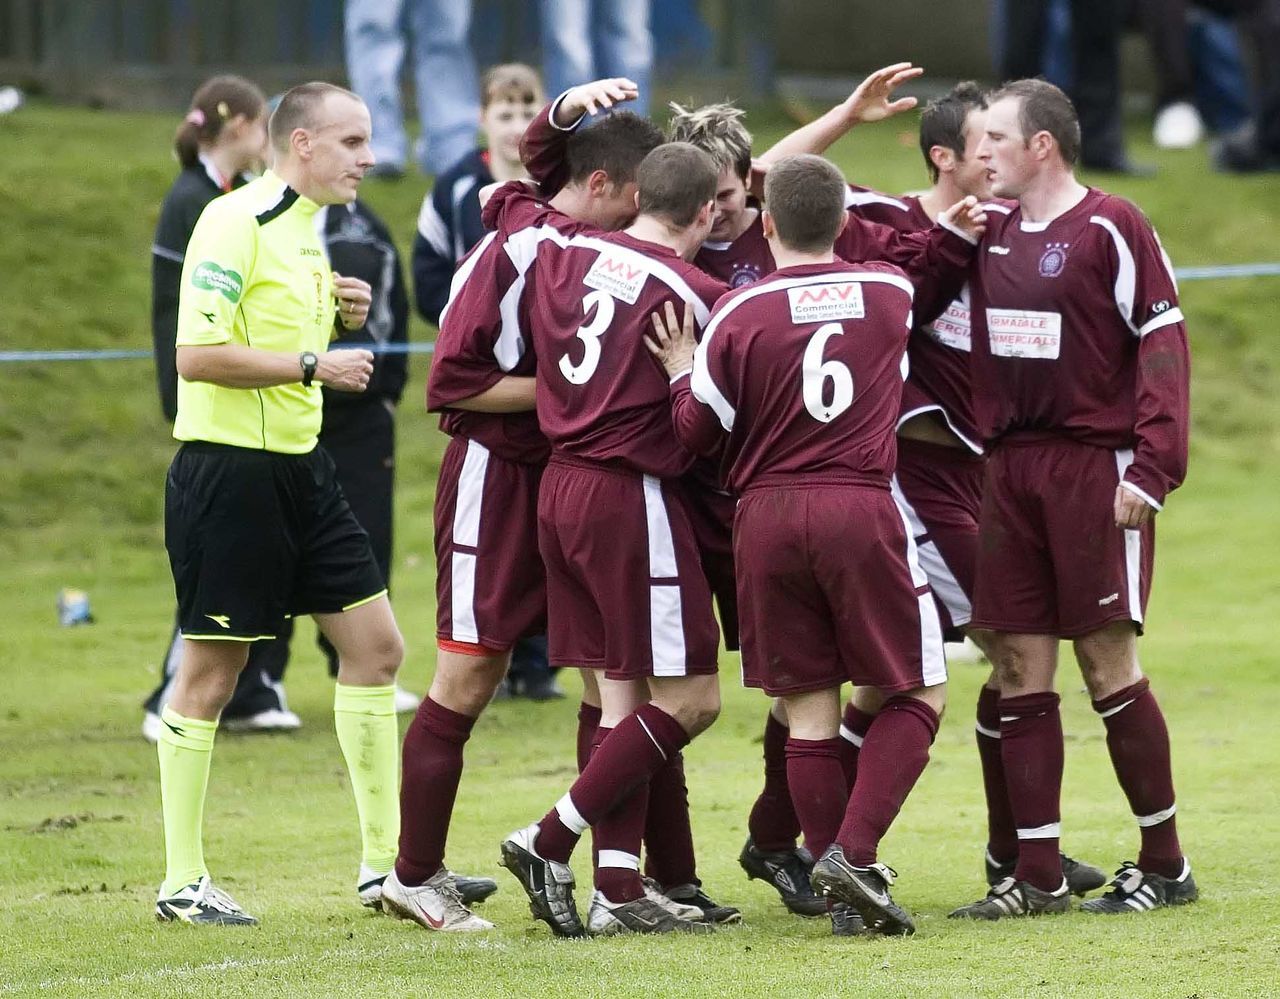 Ian Herd (centre) is congratulated on his goal by his Linlithgow team-mates